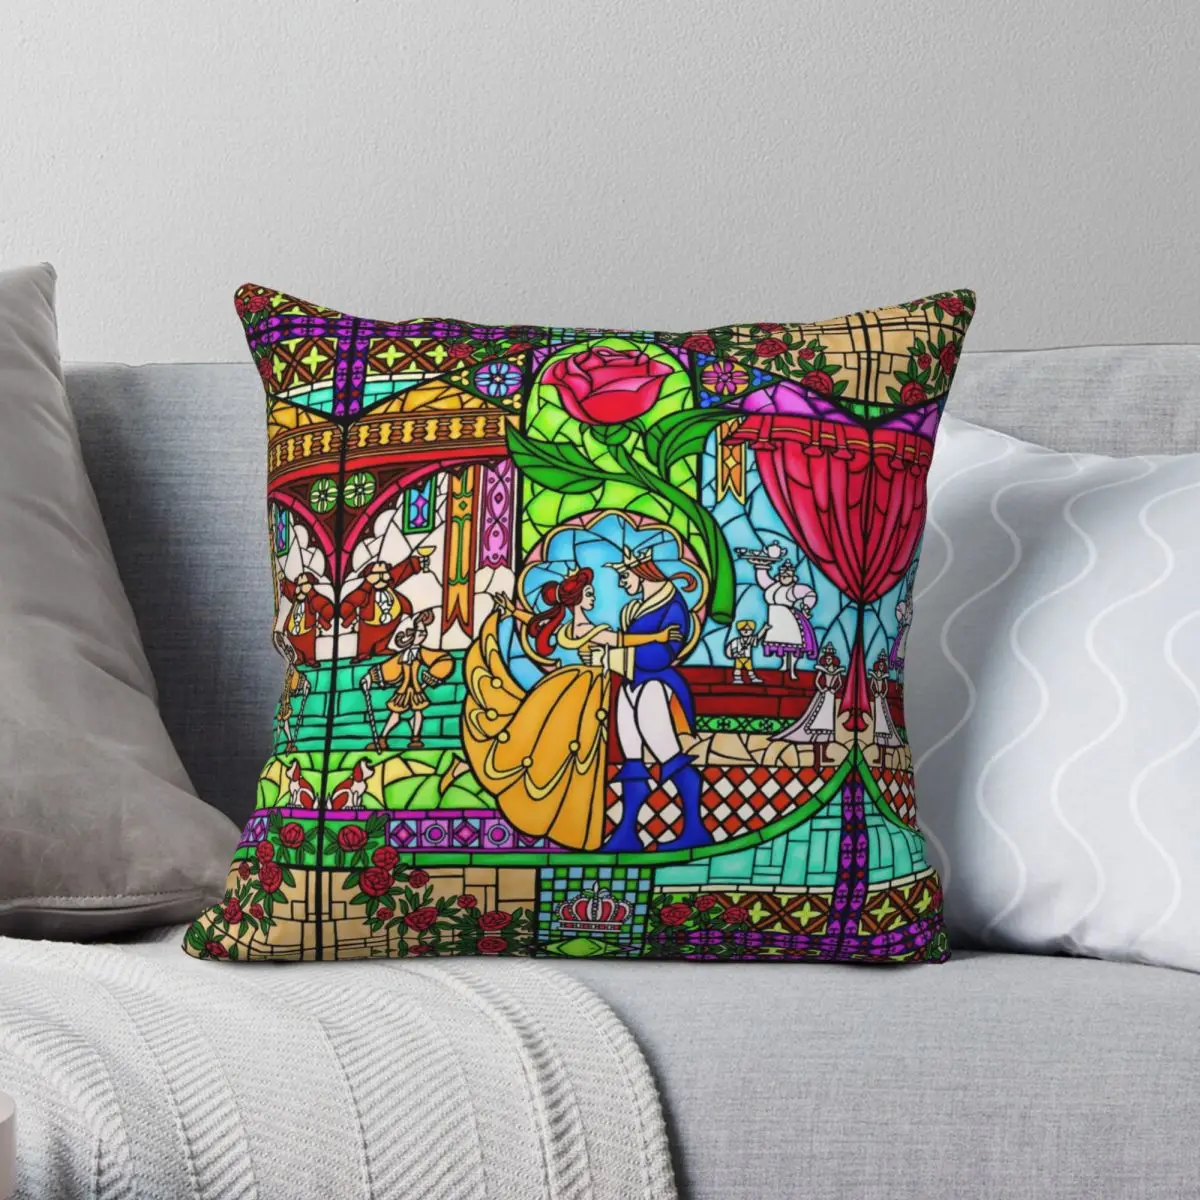 

Patterns Of The Stained Glass Window Square Pillowcase Polyester Linen Velvet Zip Decor Throw Pillow Case Car Cushion Cover 18"